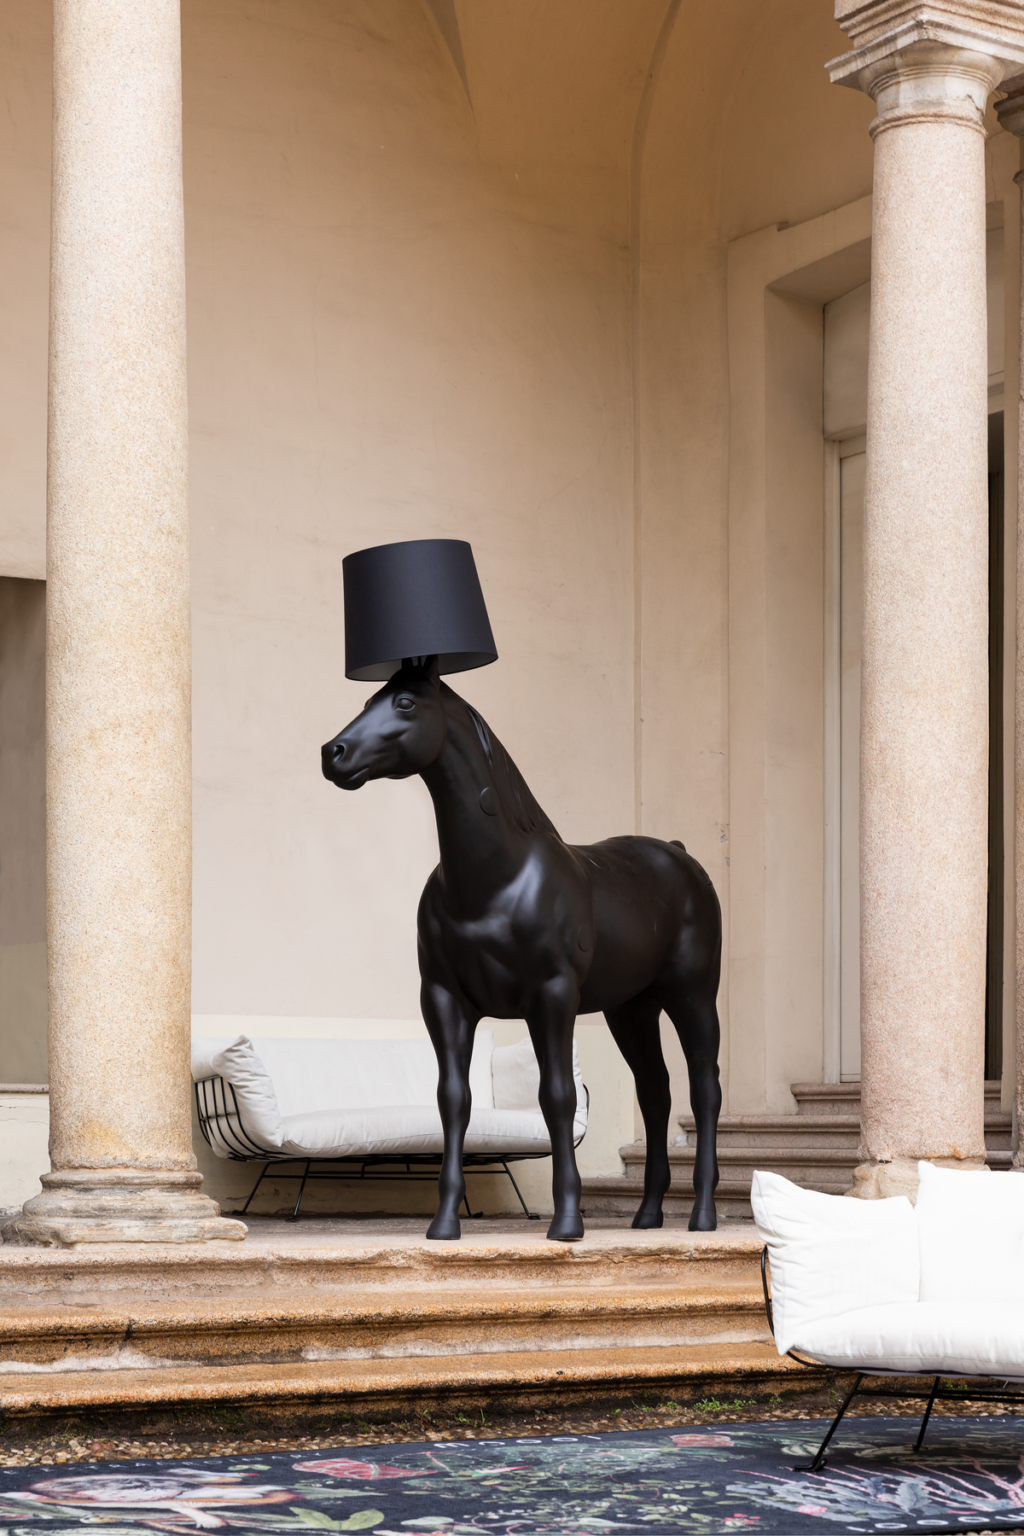 https://desidea.hu/wp-content/uploads/fly-images/160176/moooi-allolampa-horse3-1024x0.png